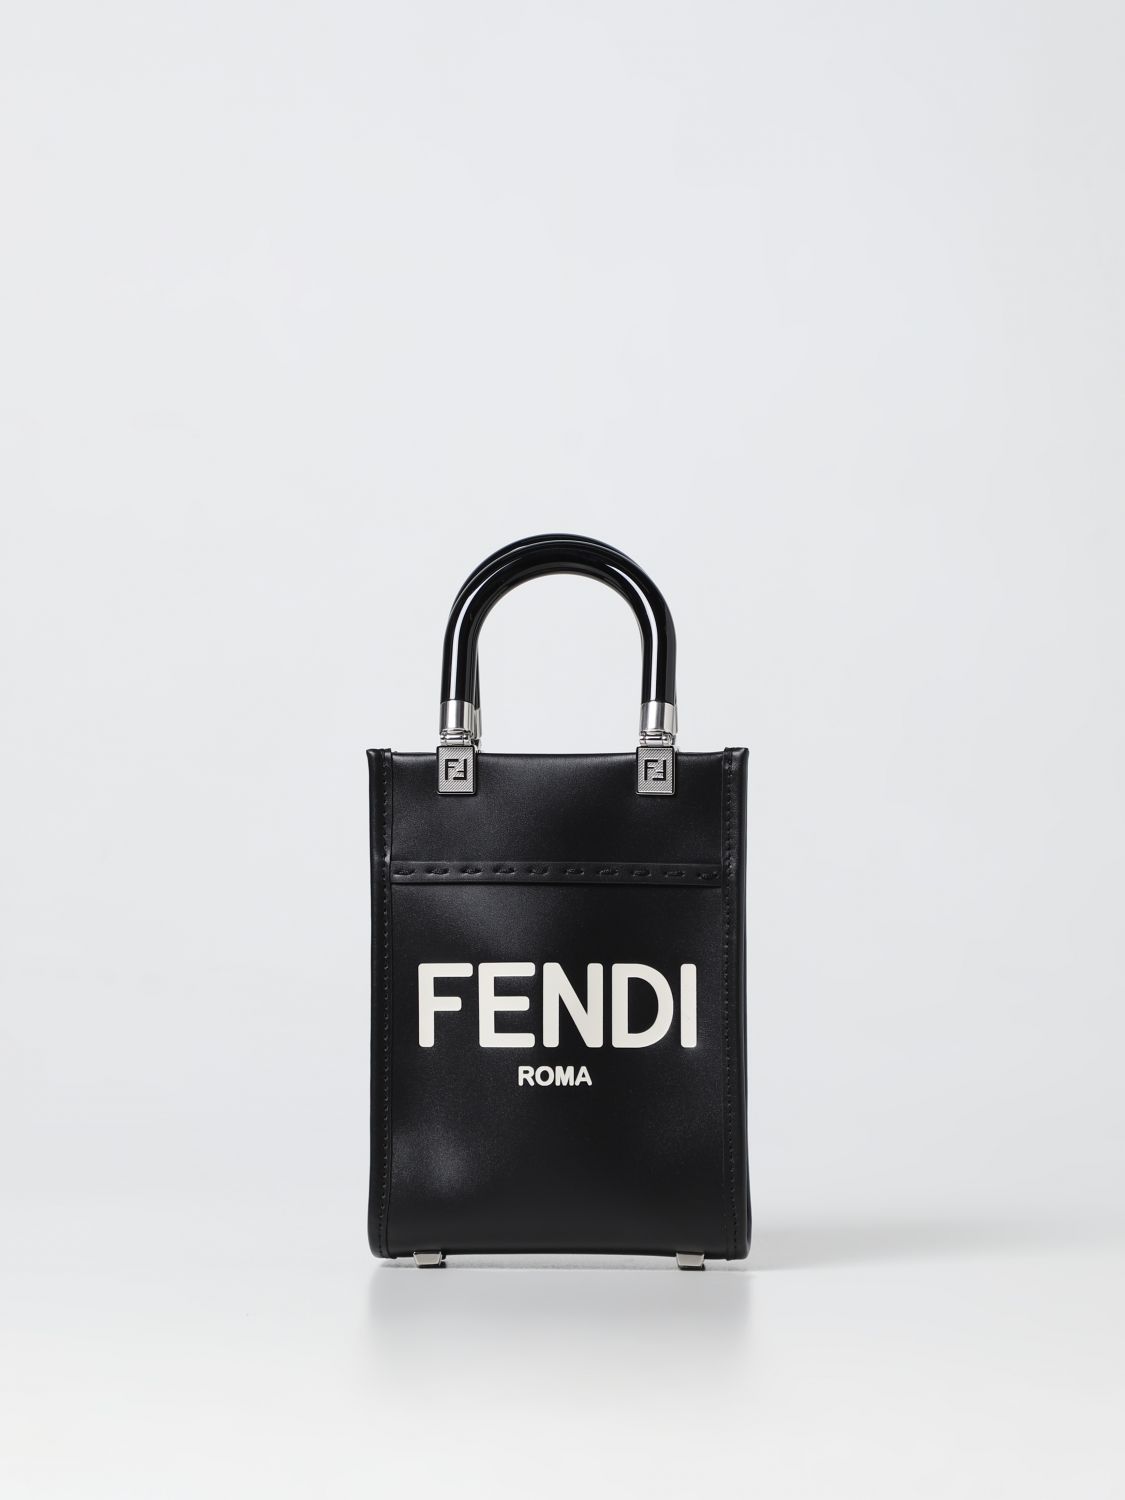 FENDI: By The Way bag in smooth leather - Dove Grey | Fendi mini bag  8BS067ABVL online at